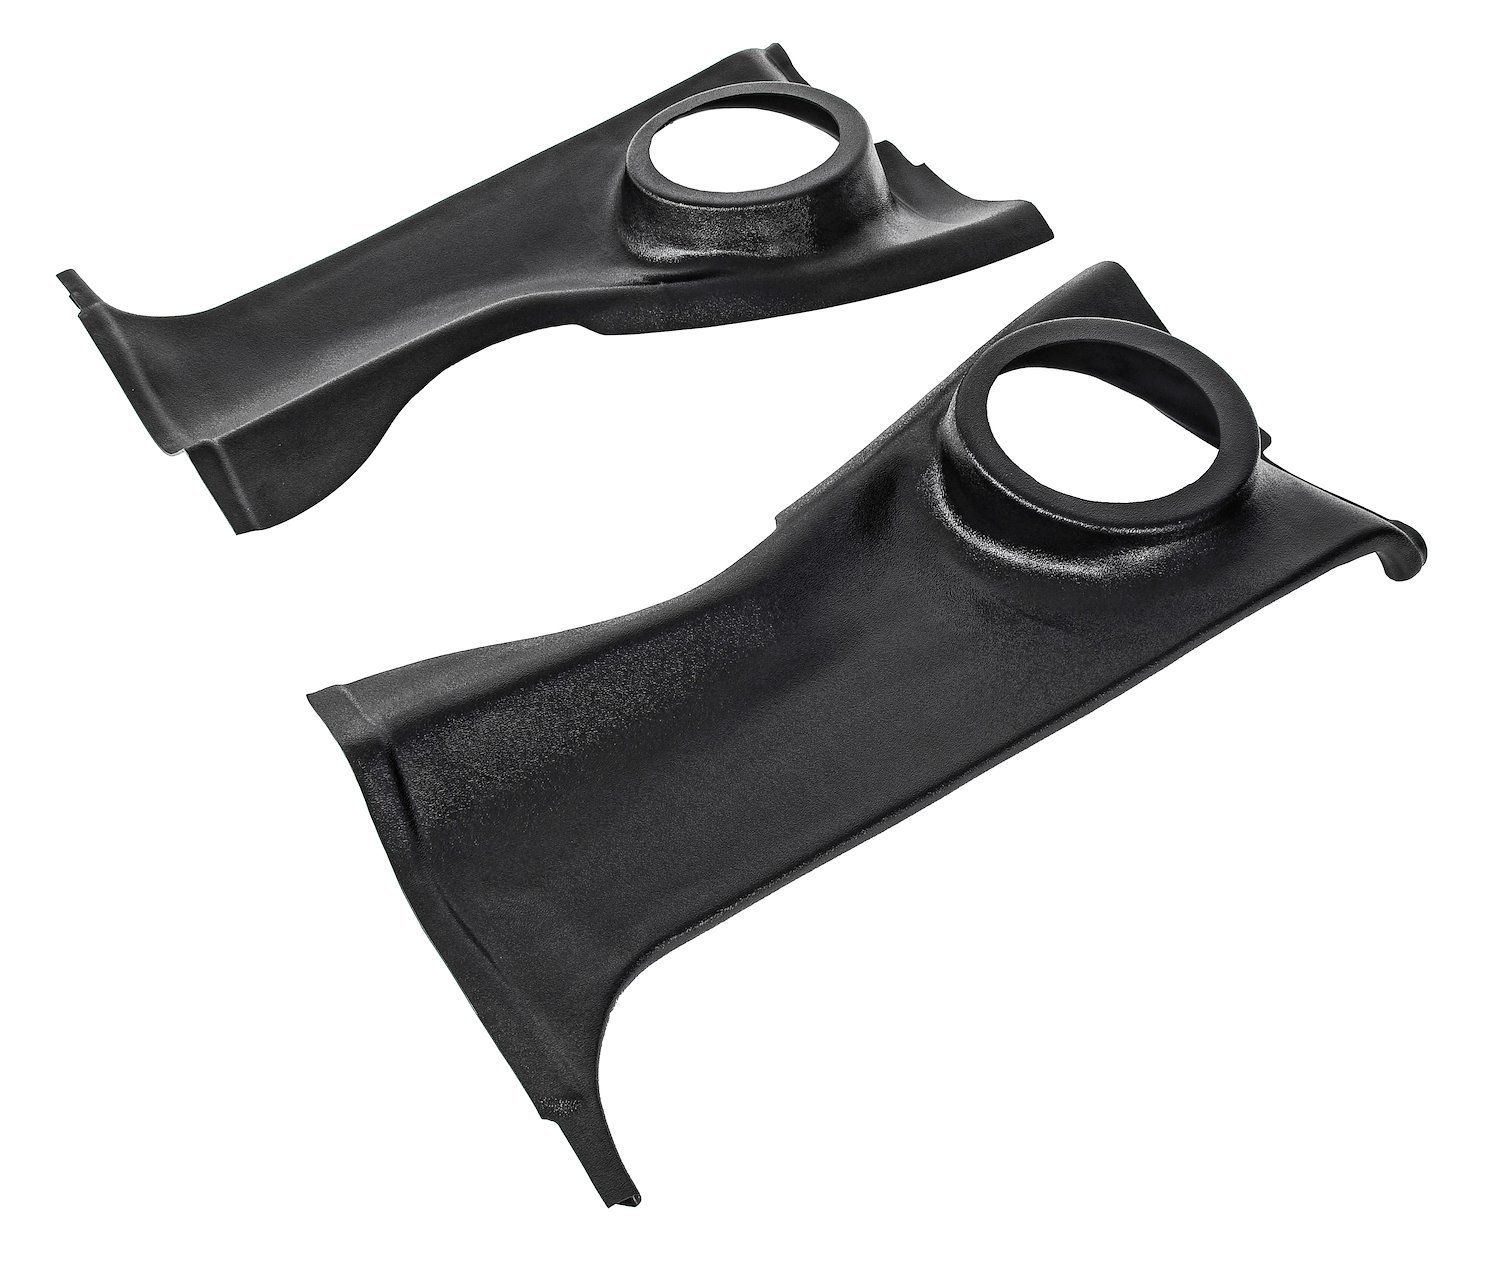 Rear Kick Panels for 1968-1972 Chevrolet El Camino [Cutouts for 6 1/2 in. Round Speakers]